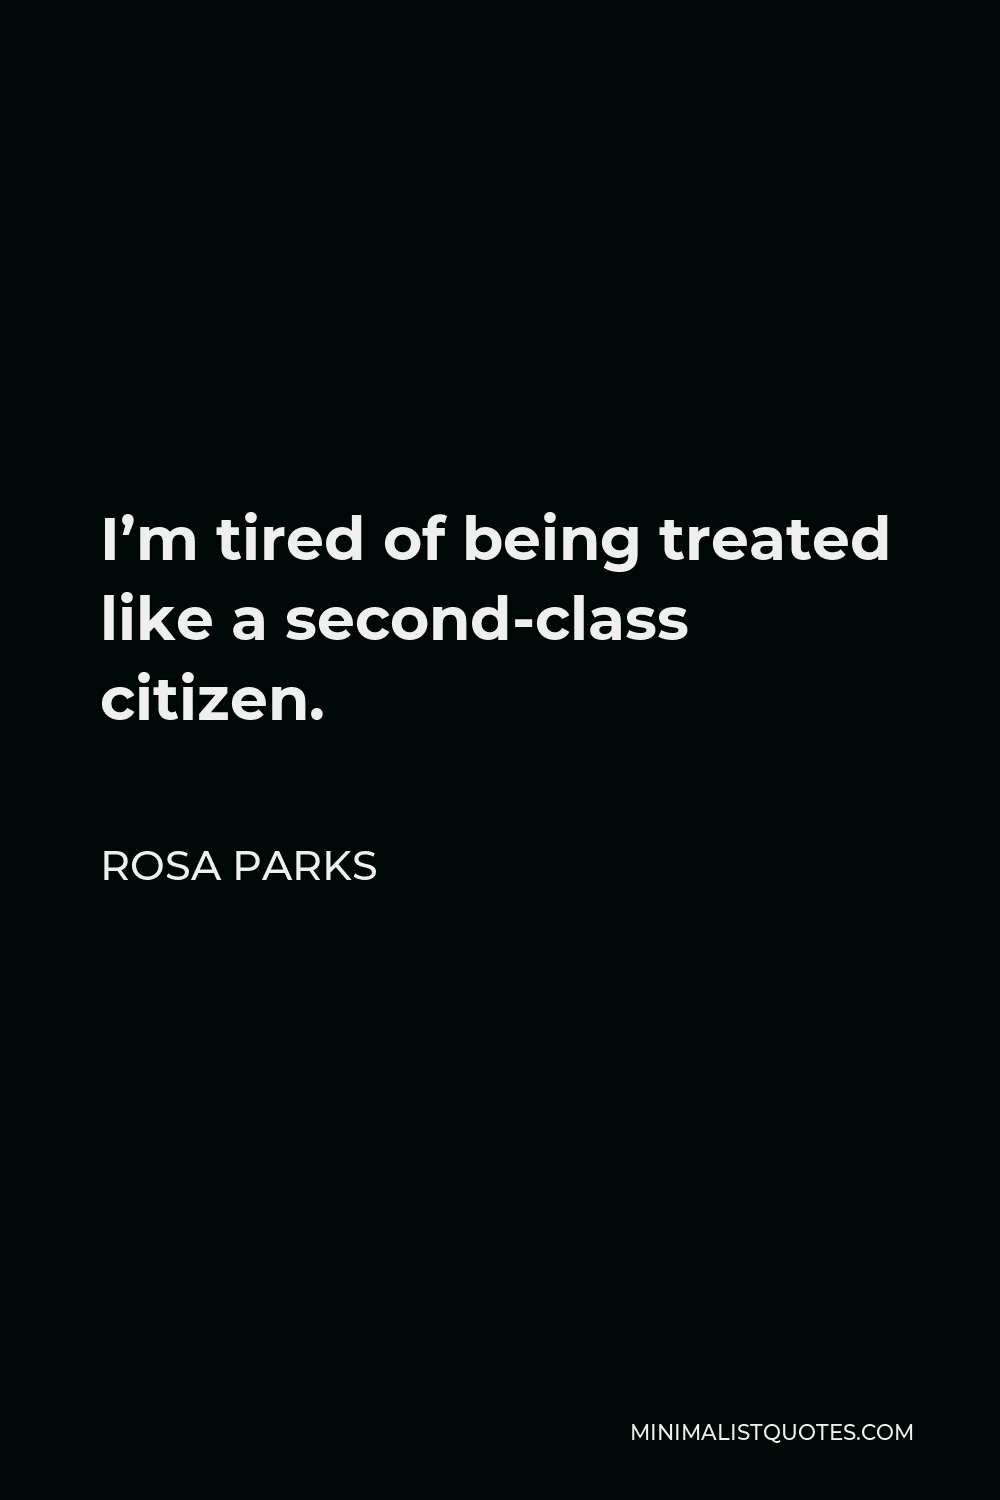 Rosa Parks Quote - I’m tired of being treated like a second-class citizen.